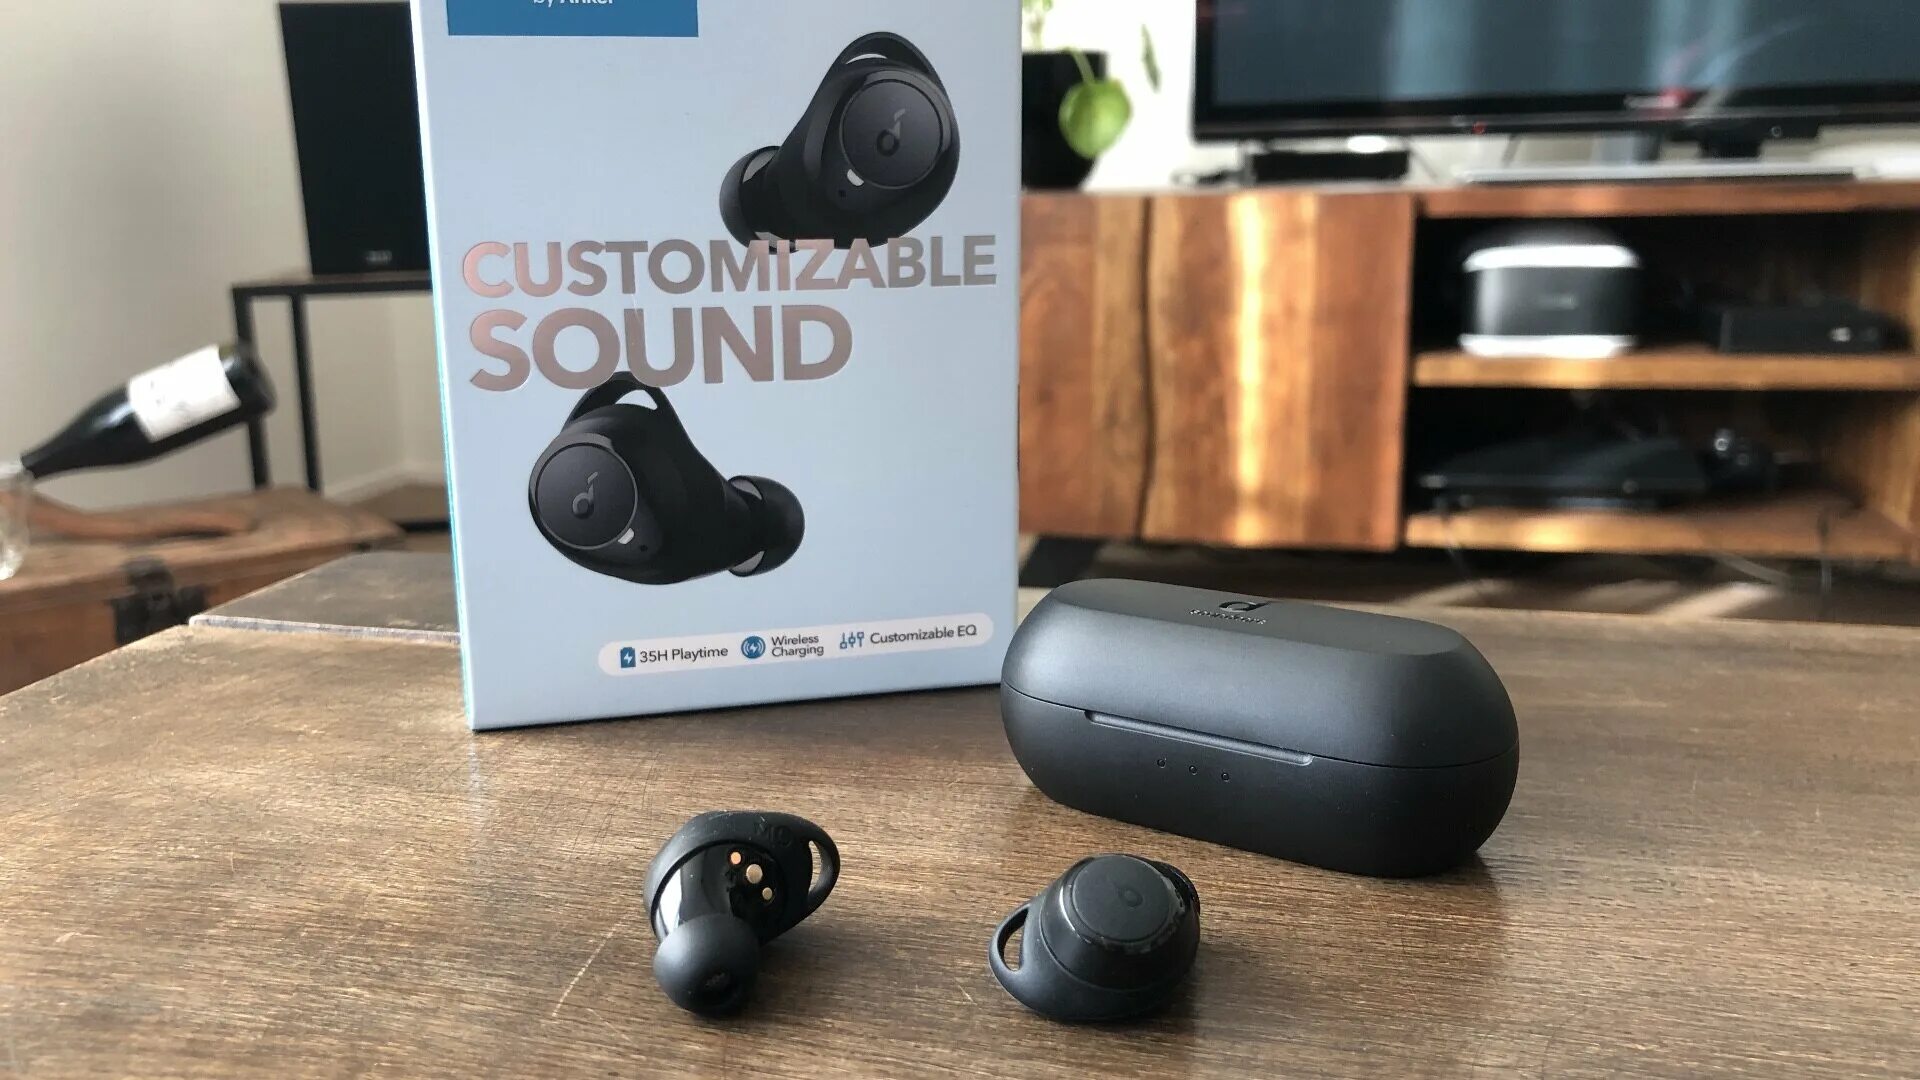 Anker soundcore life nc. Anker SOUNDCORE Life a1 true Wireless Earbuds. SOUNDCORE Anker Life a1. Anker SOUNDCORE Life 2 коробка. Anker SOUNDCORE Life p2i цвета.